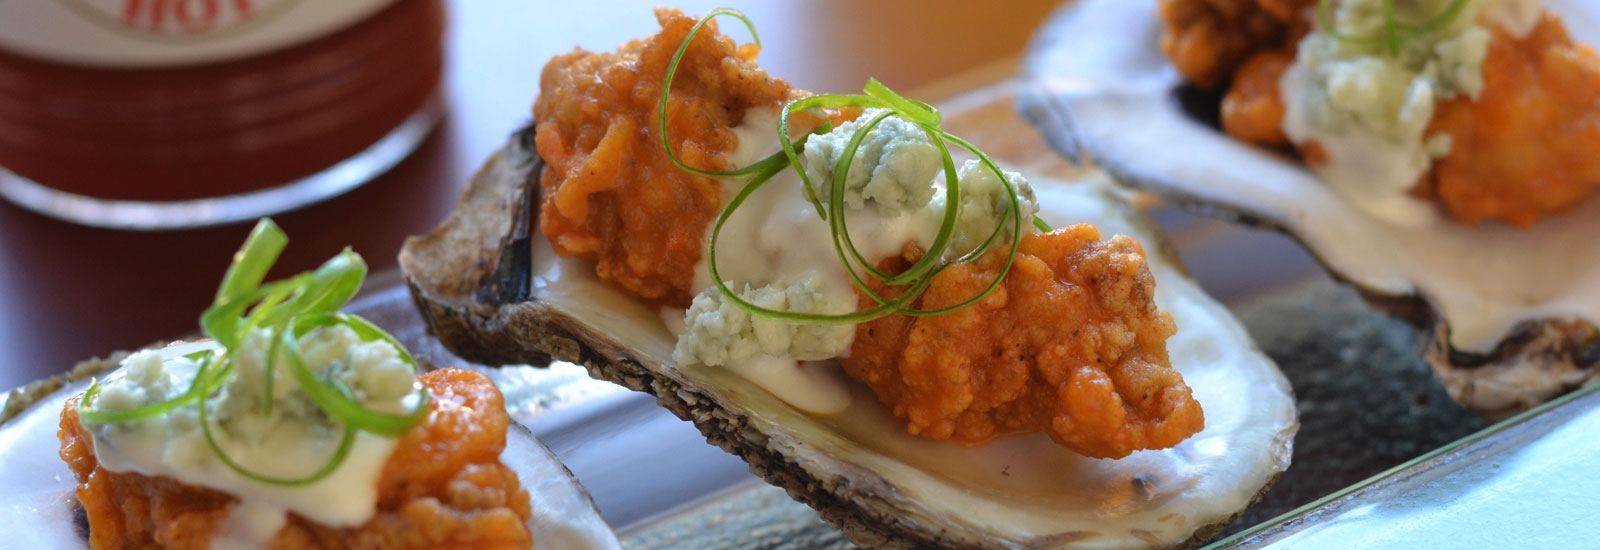 Red Fish Grill's famous BBQ oysters with a bottle of Crystal Hot Sauce ready to eat.